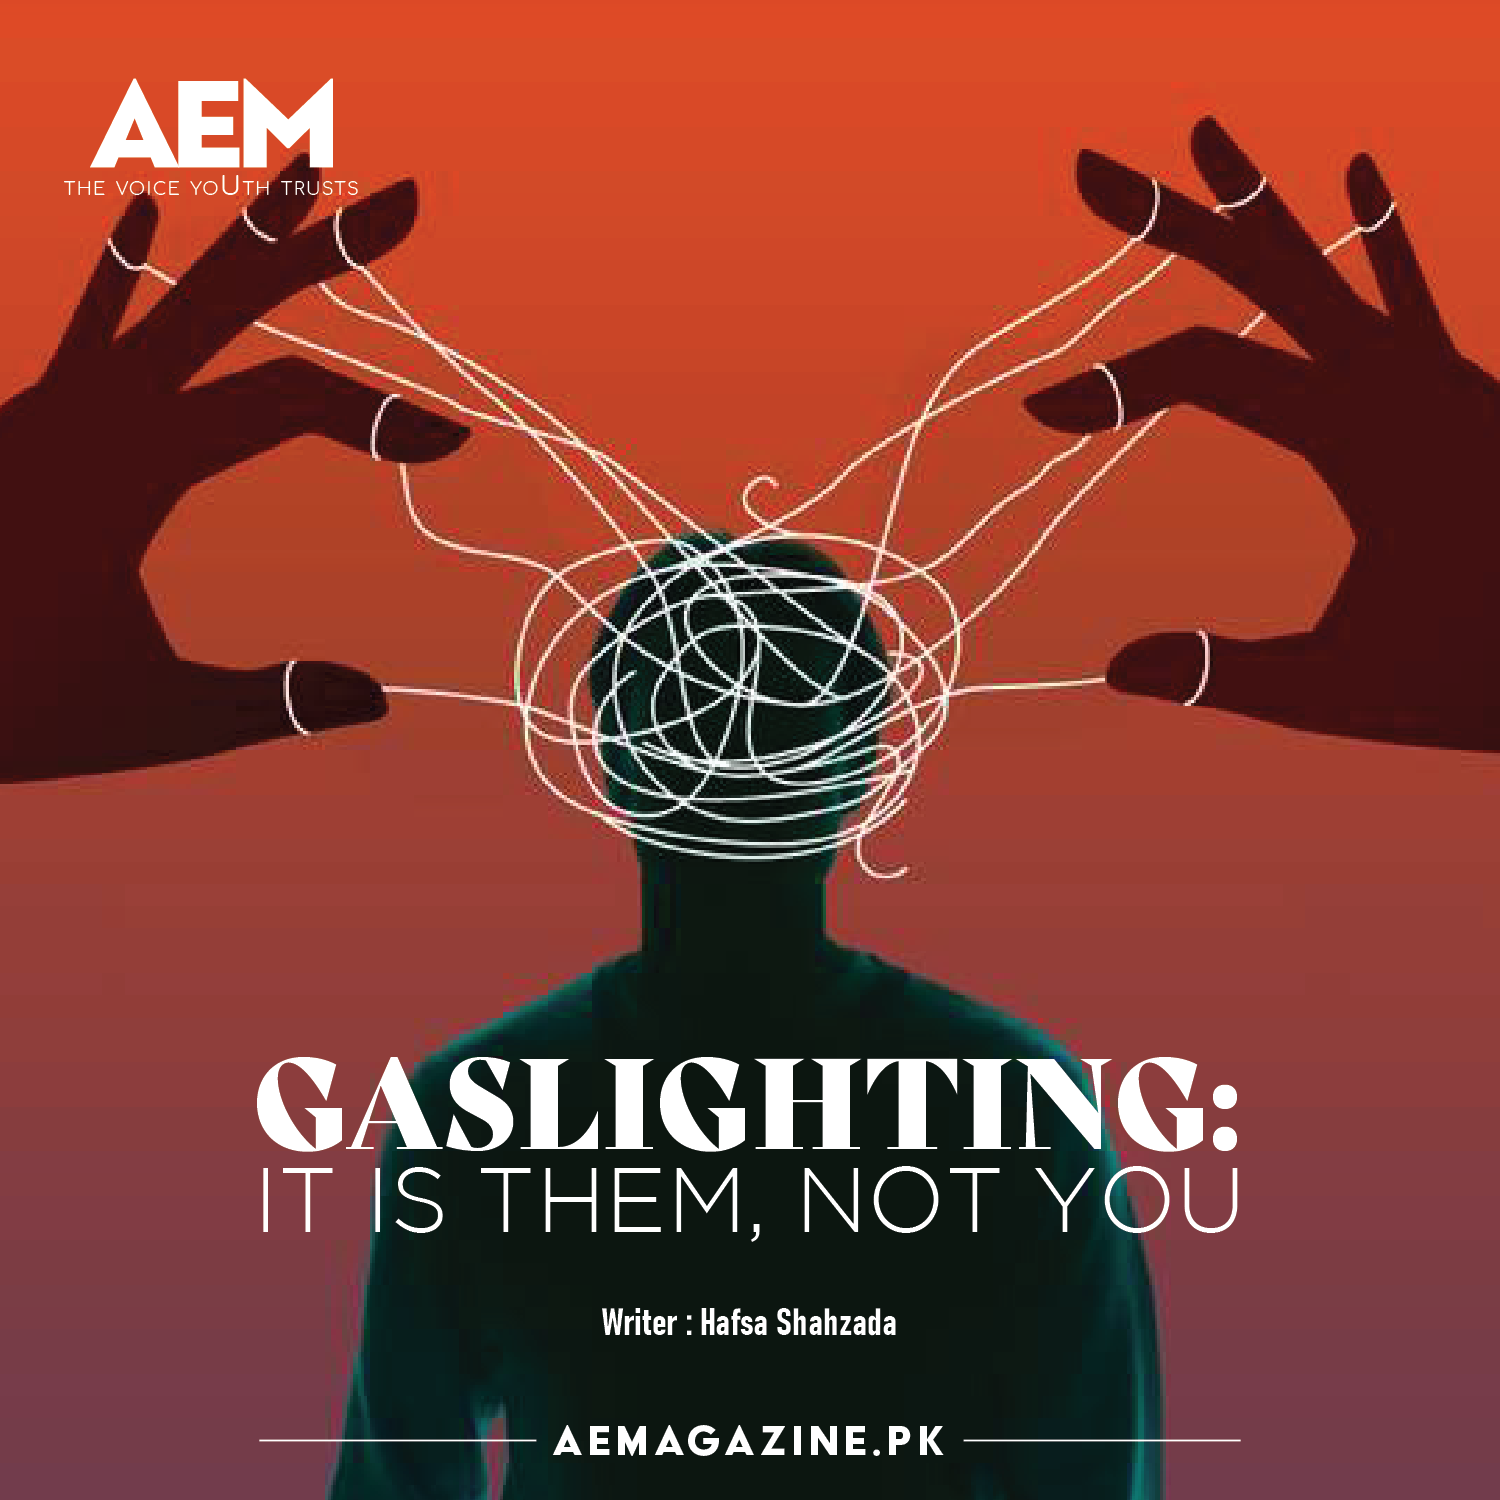 GASLIGHTING: IT IS THEM, NOT YOU